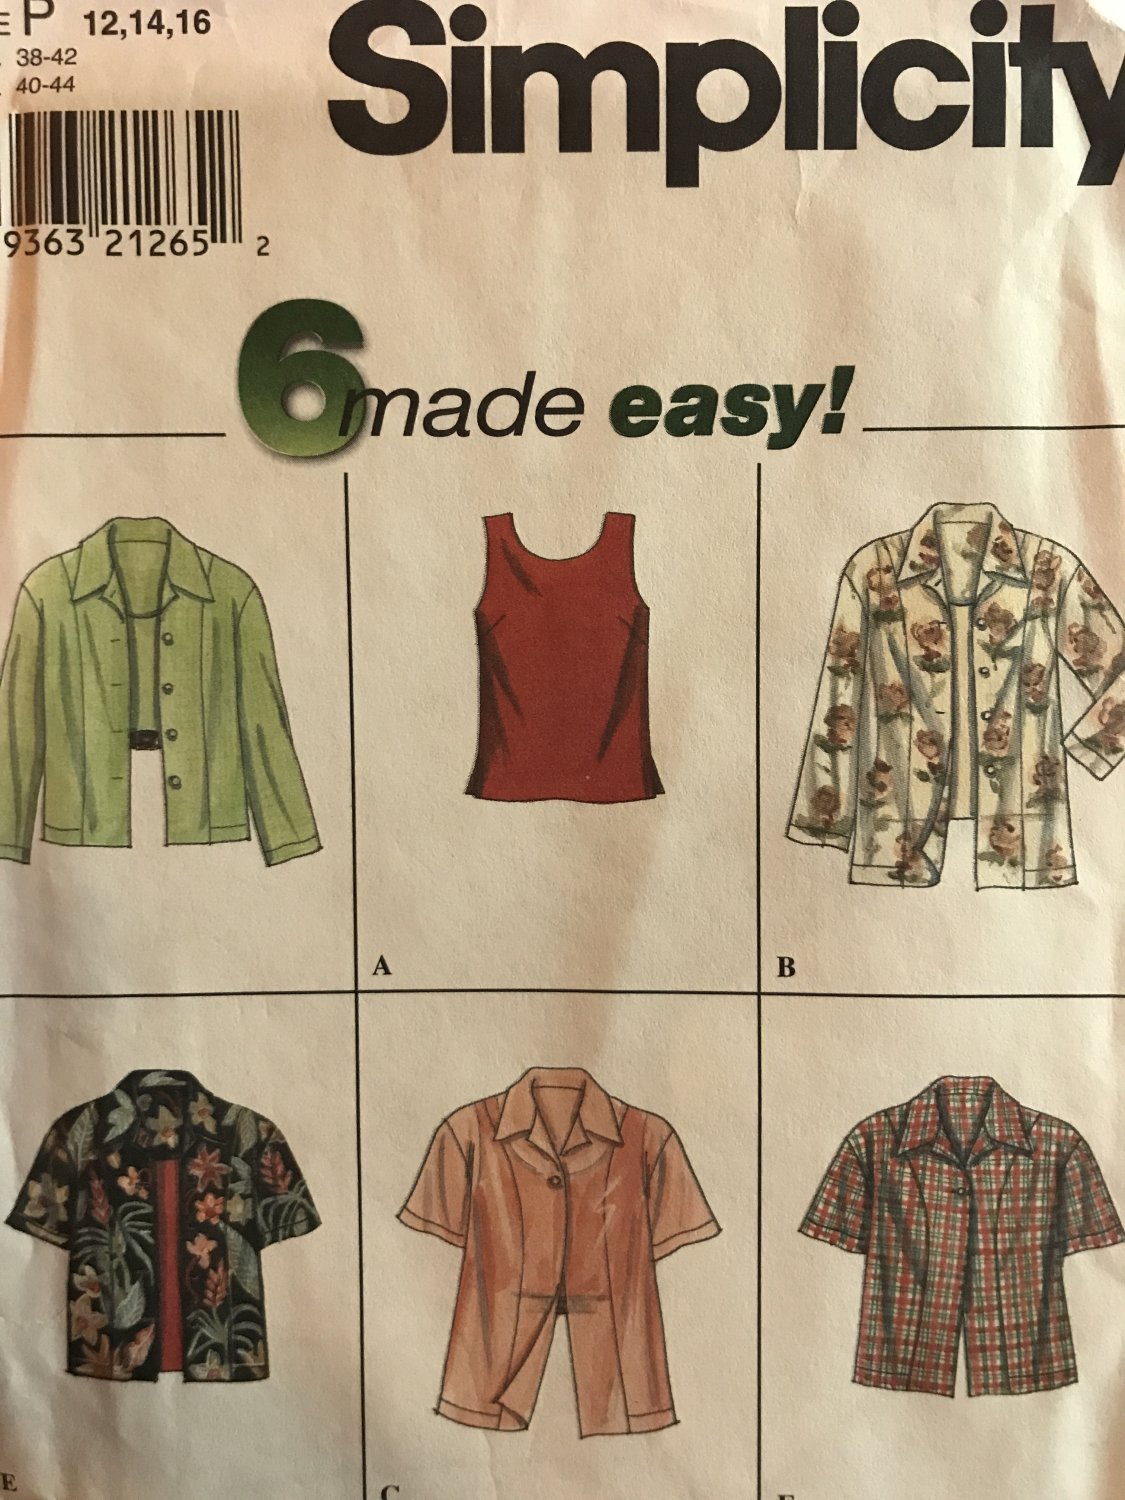 Simplicity 8013 Sewing Pattern Misses' Top and Shirt, Size 12, 14, 16 Sewing Pattern